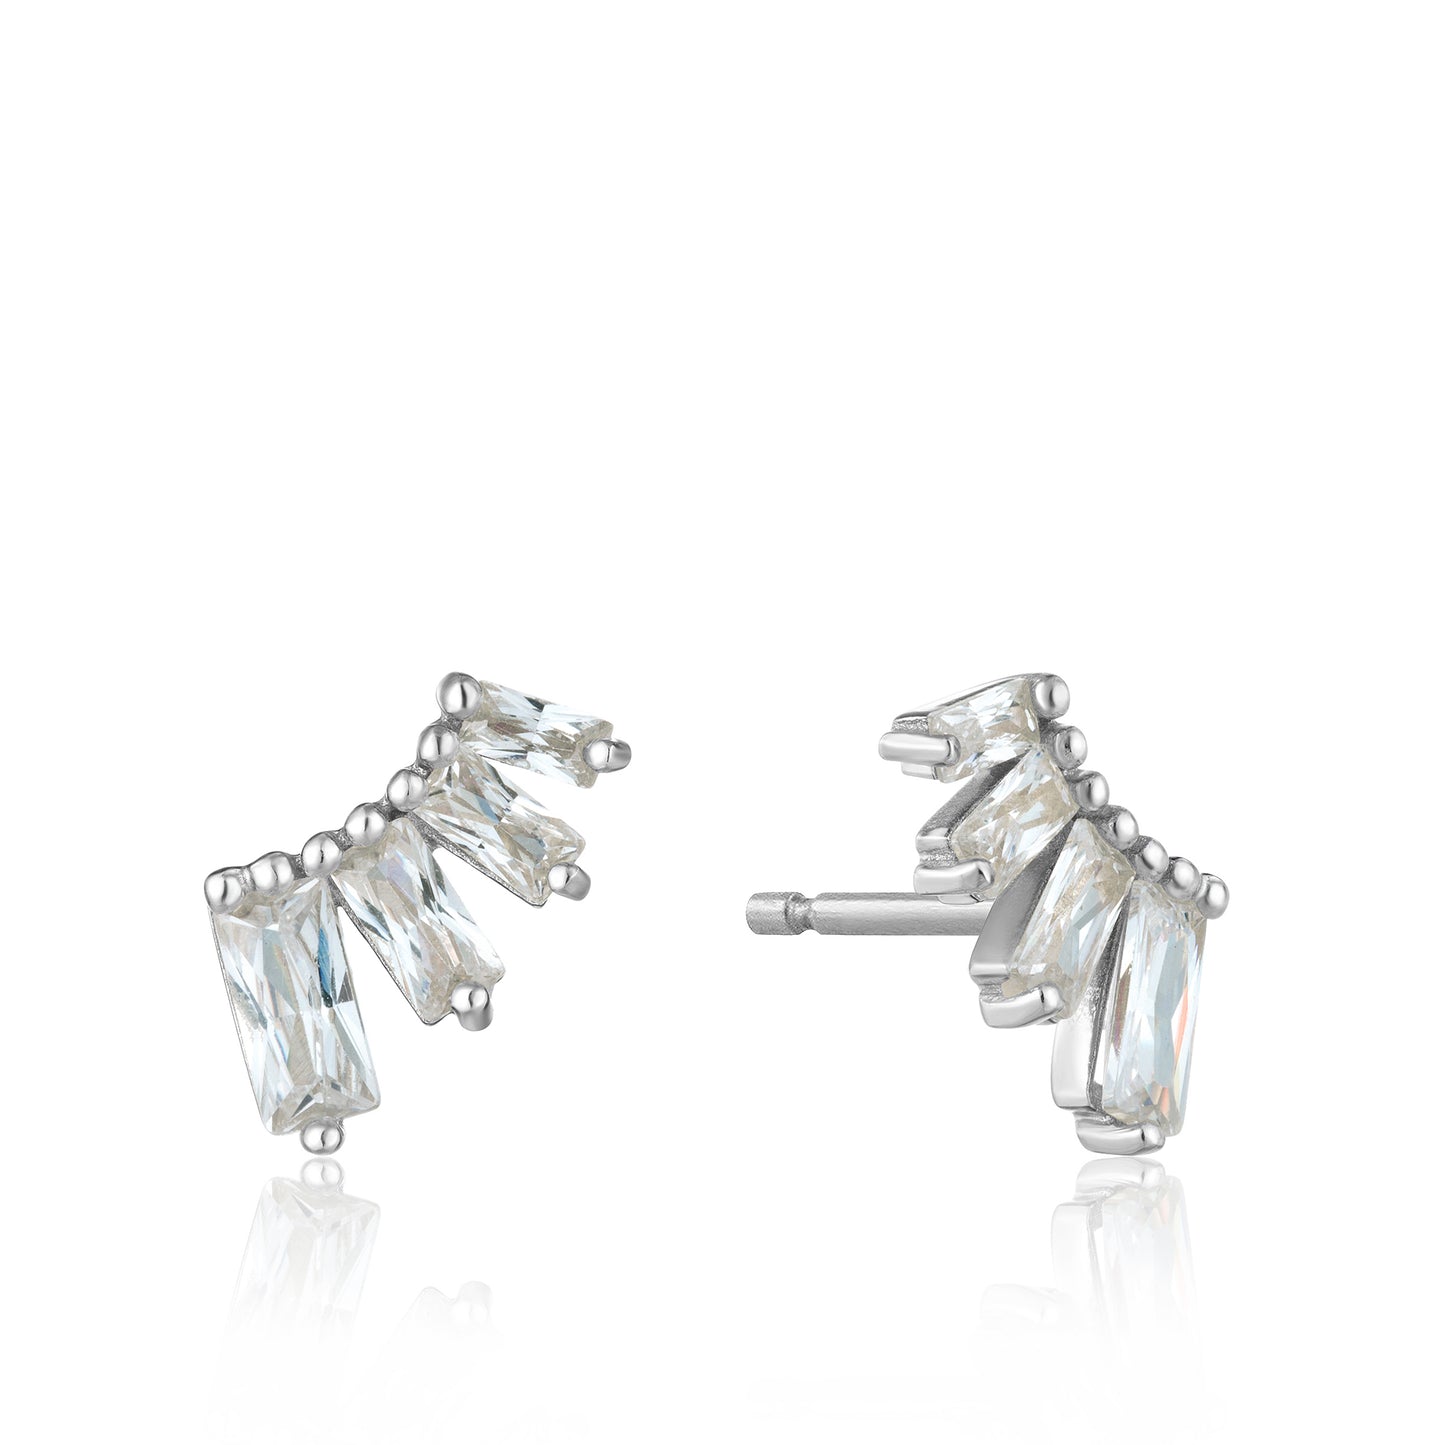 ANIA HAIE ANIA HAIE - Silver Glow Bar Stud Earrings available at The Good Life Boutique